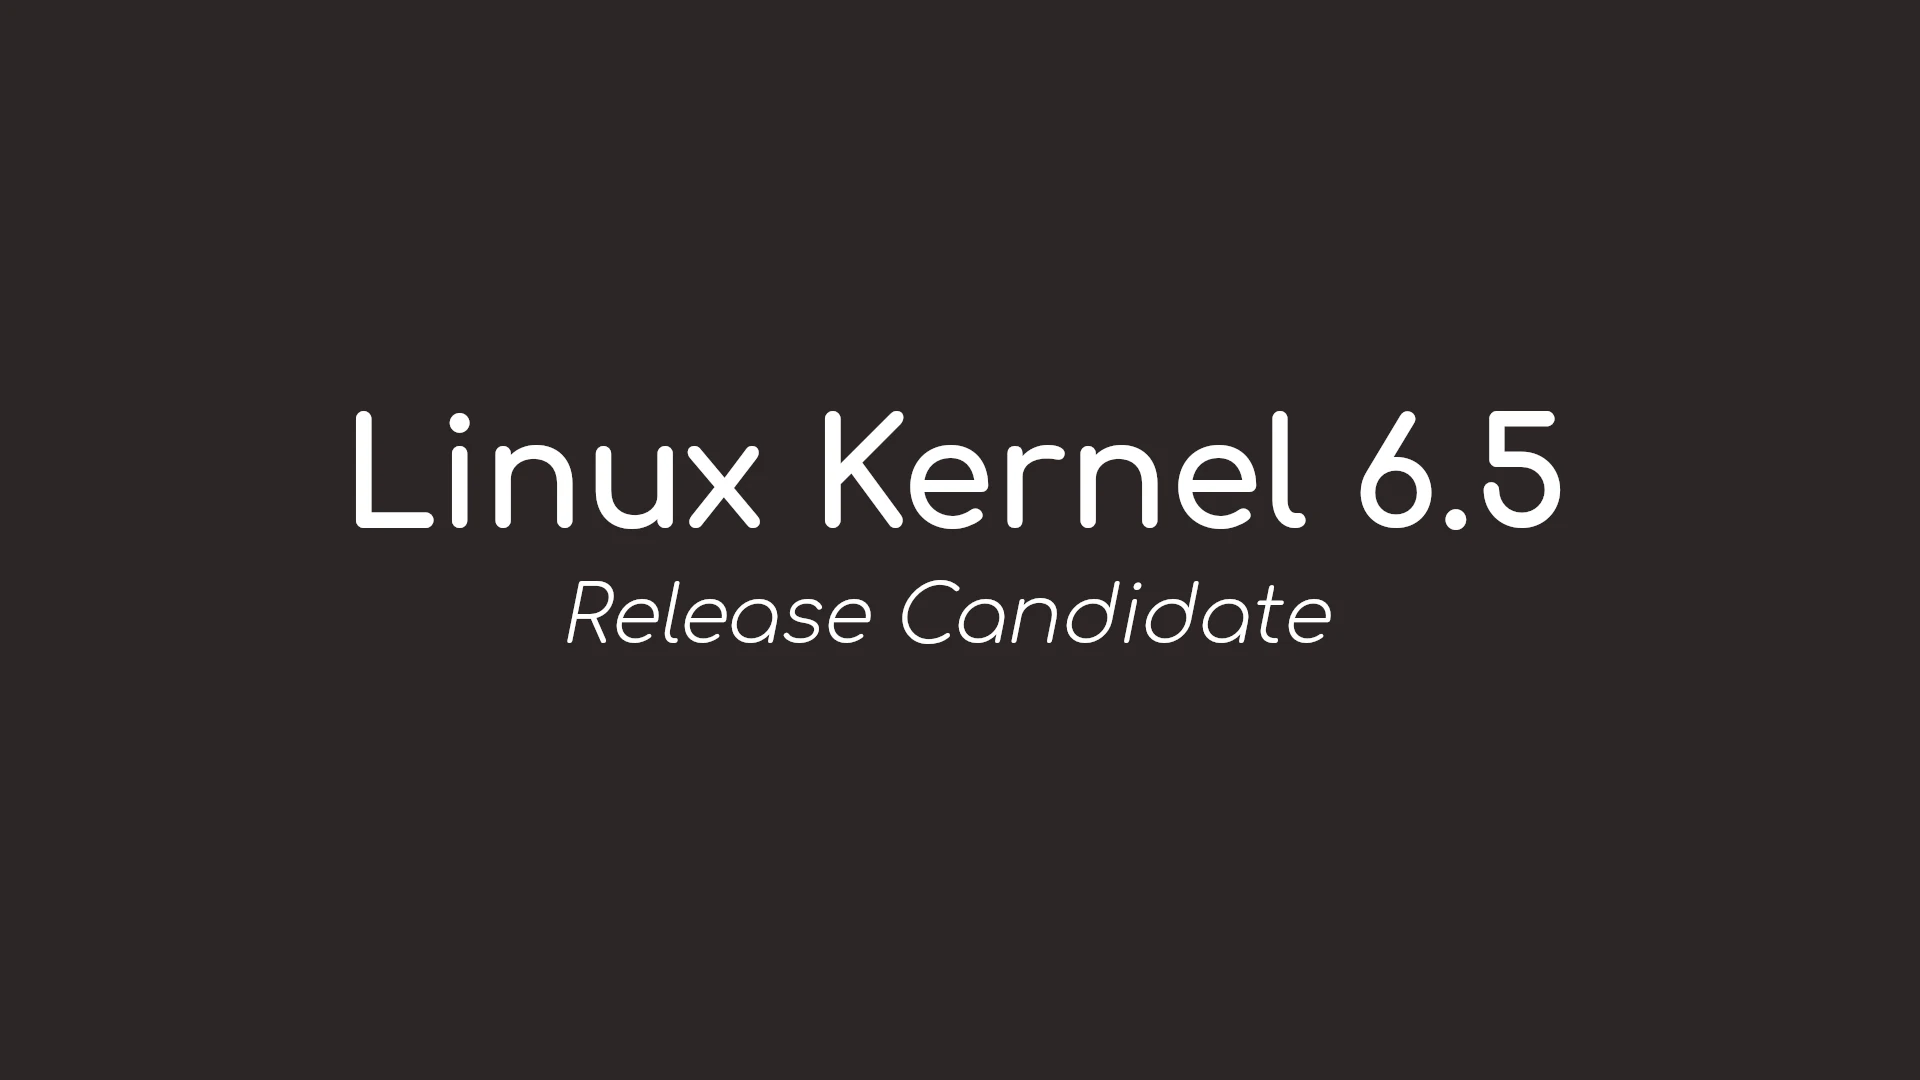 Linus Torvalds Announces First Linux Kernel 6.5 Release Candidate